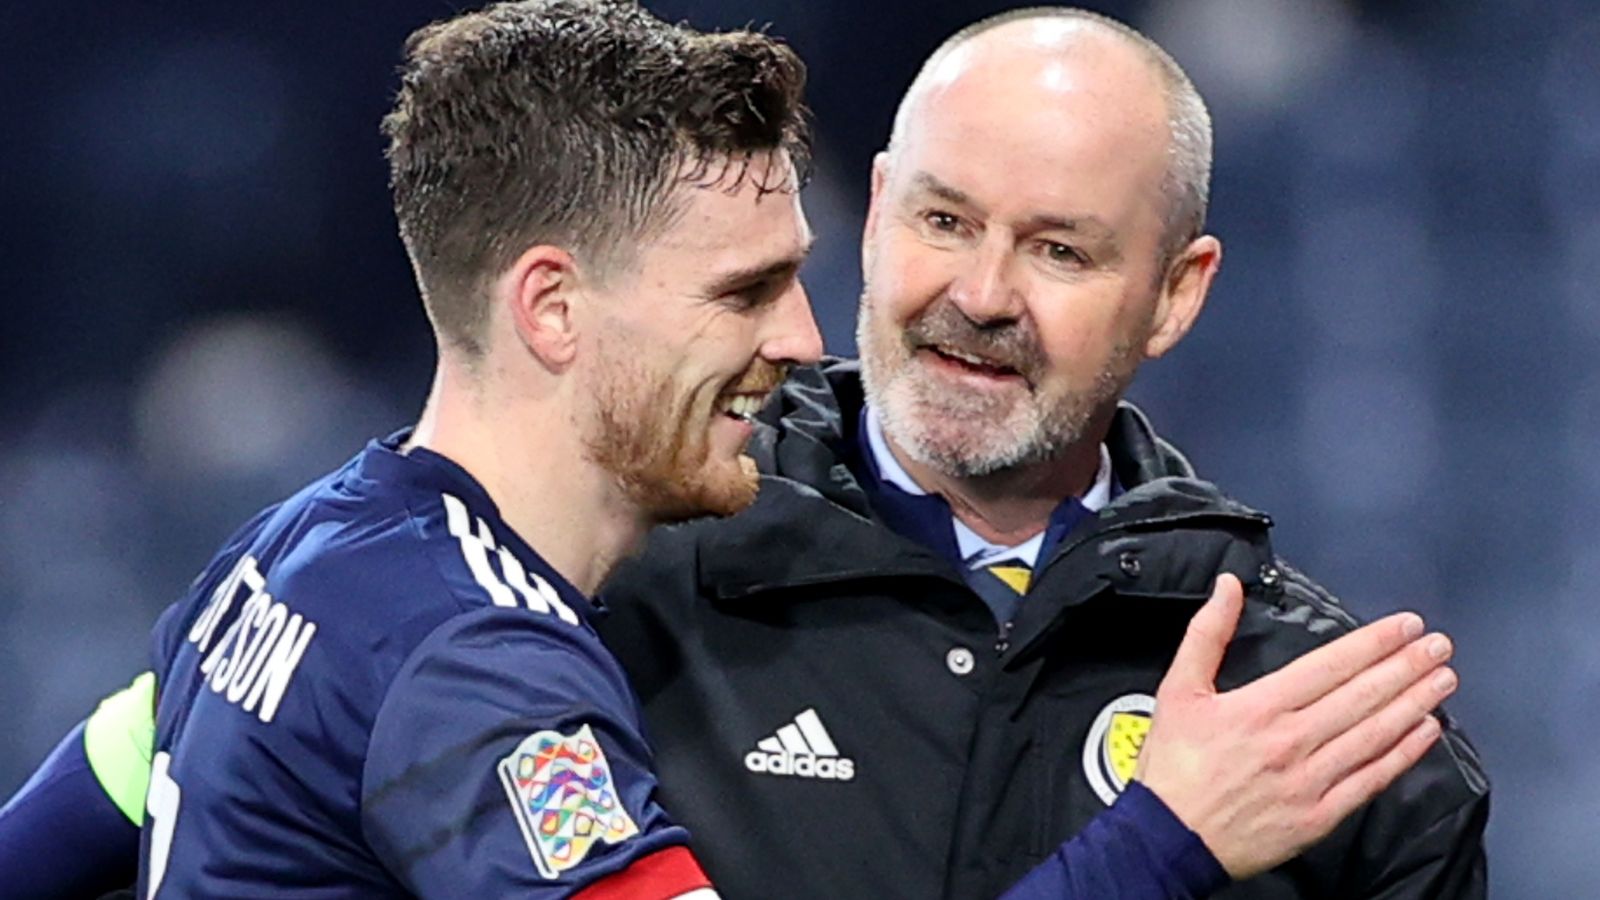 Euro 2020: Who should start for Scotland vs Czech Republic? Ex-players pick their XIs for Hampden Park opener